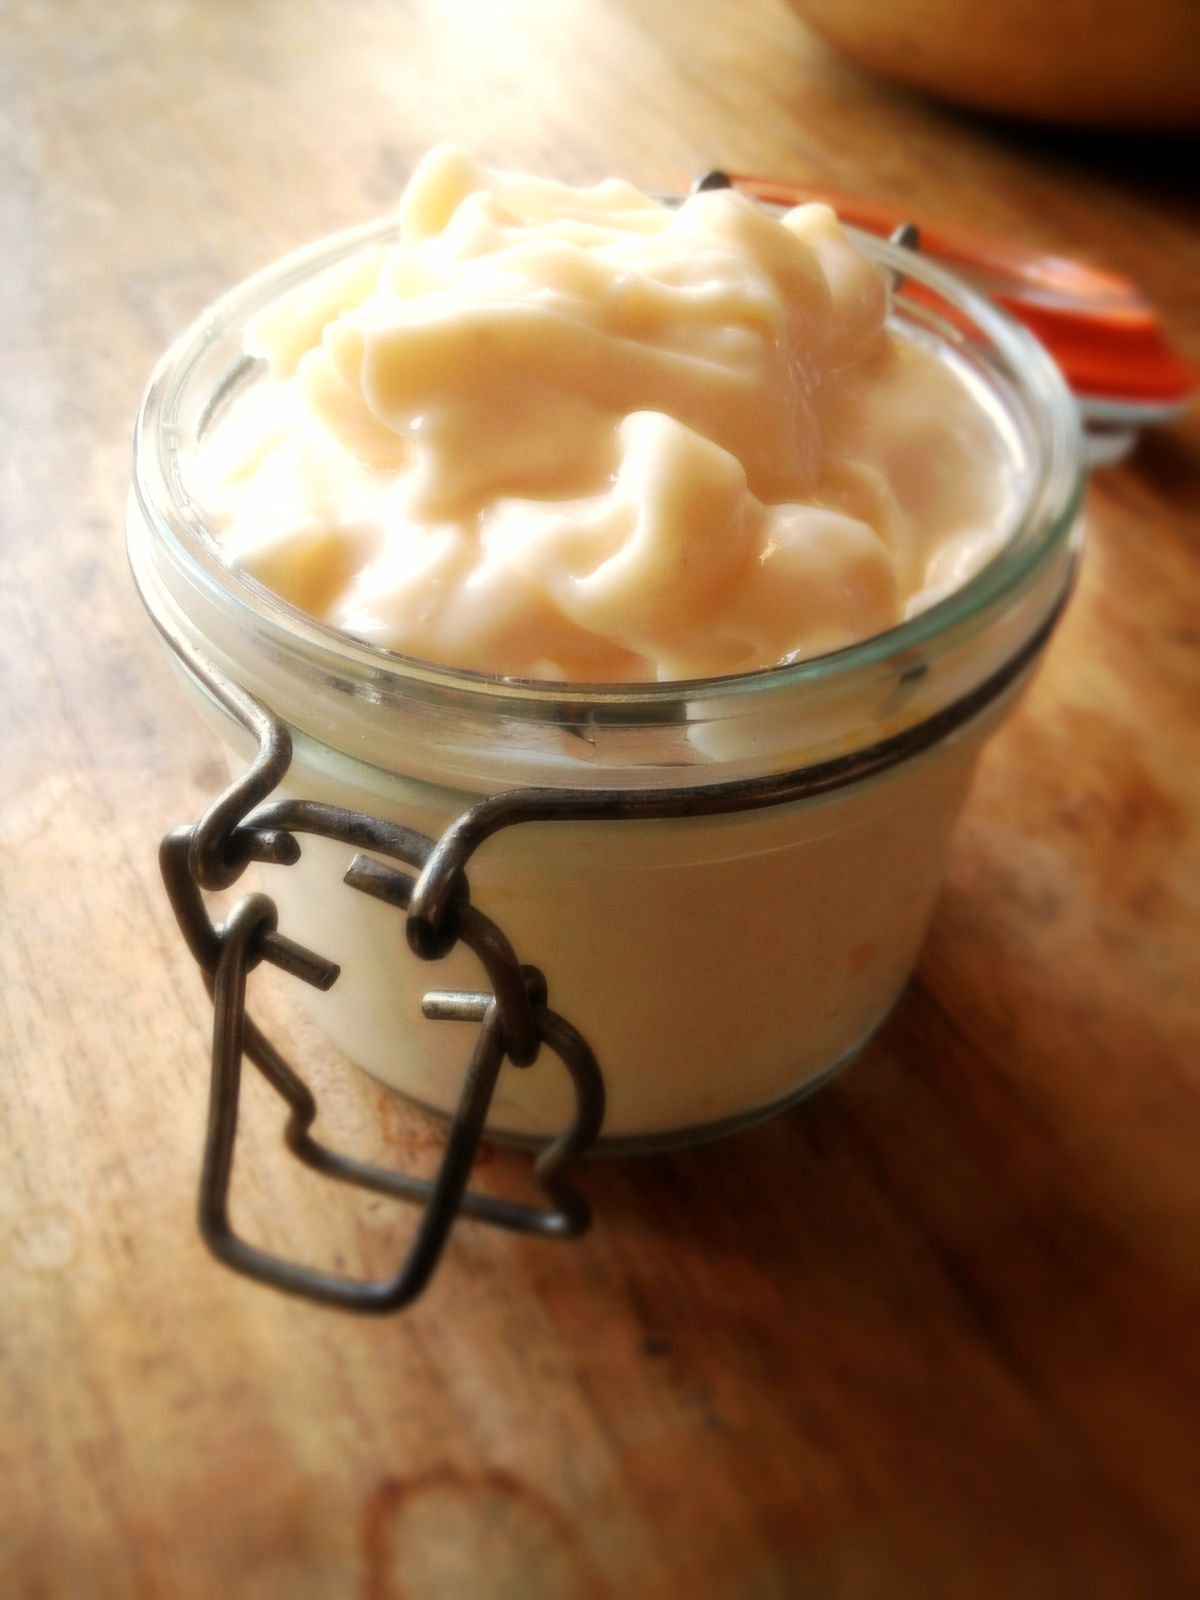 Foodista | Recipes, Cooking Tips, and Food News | Dutch Mayonnaise